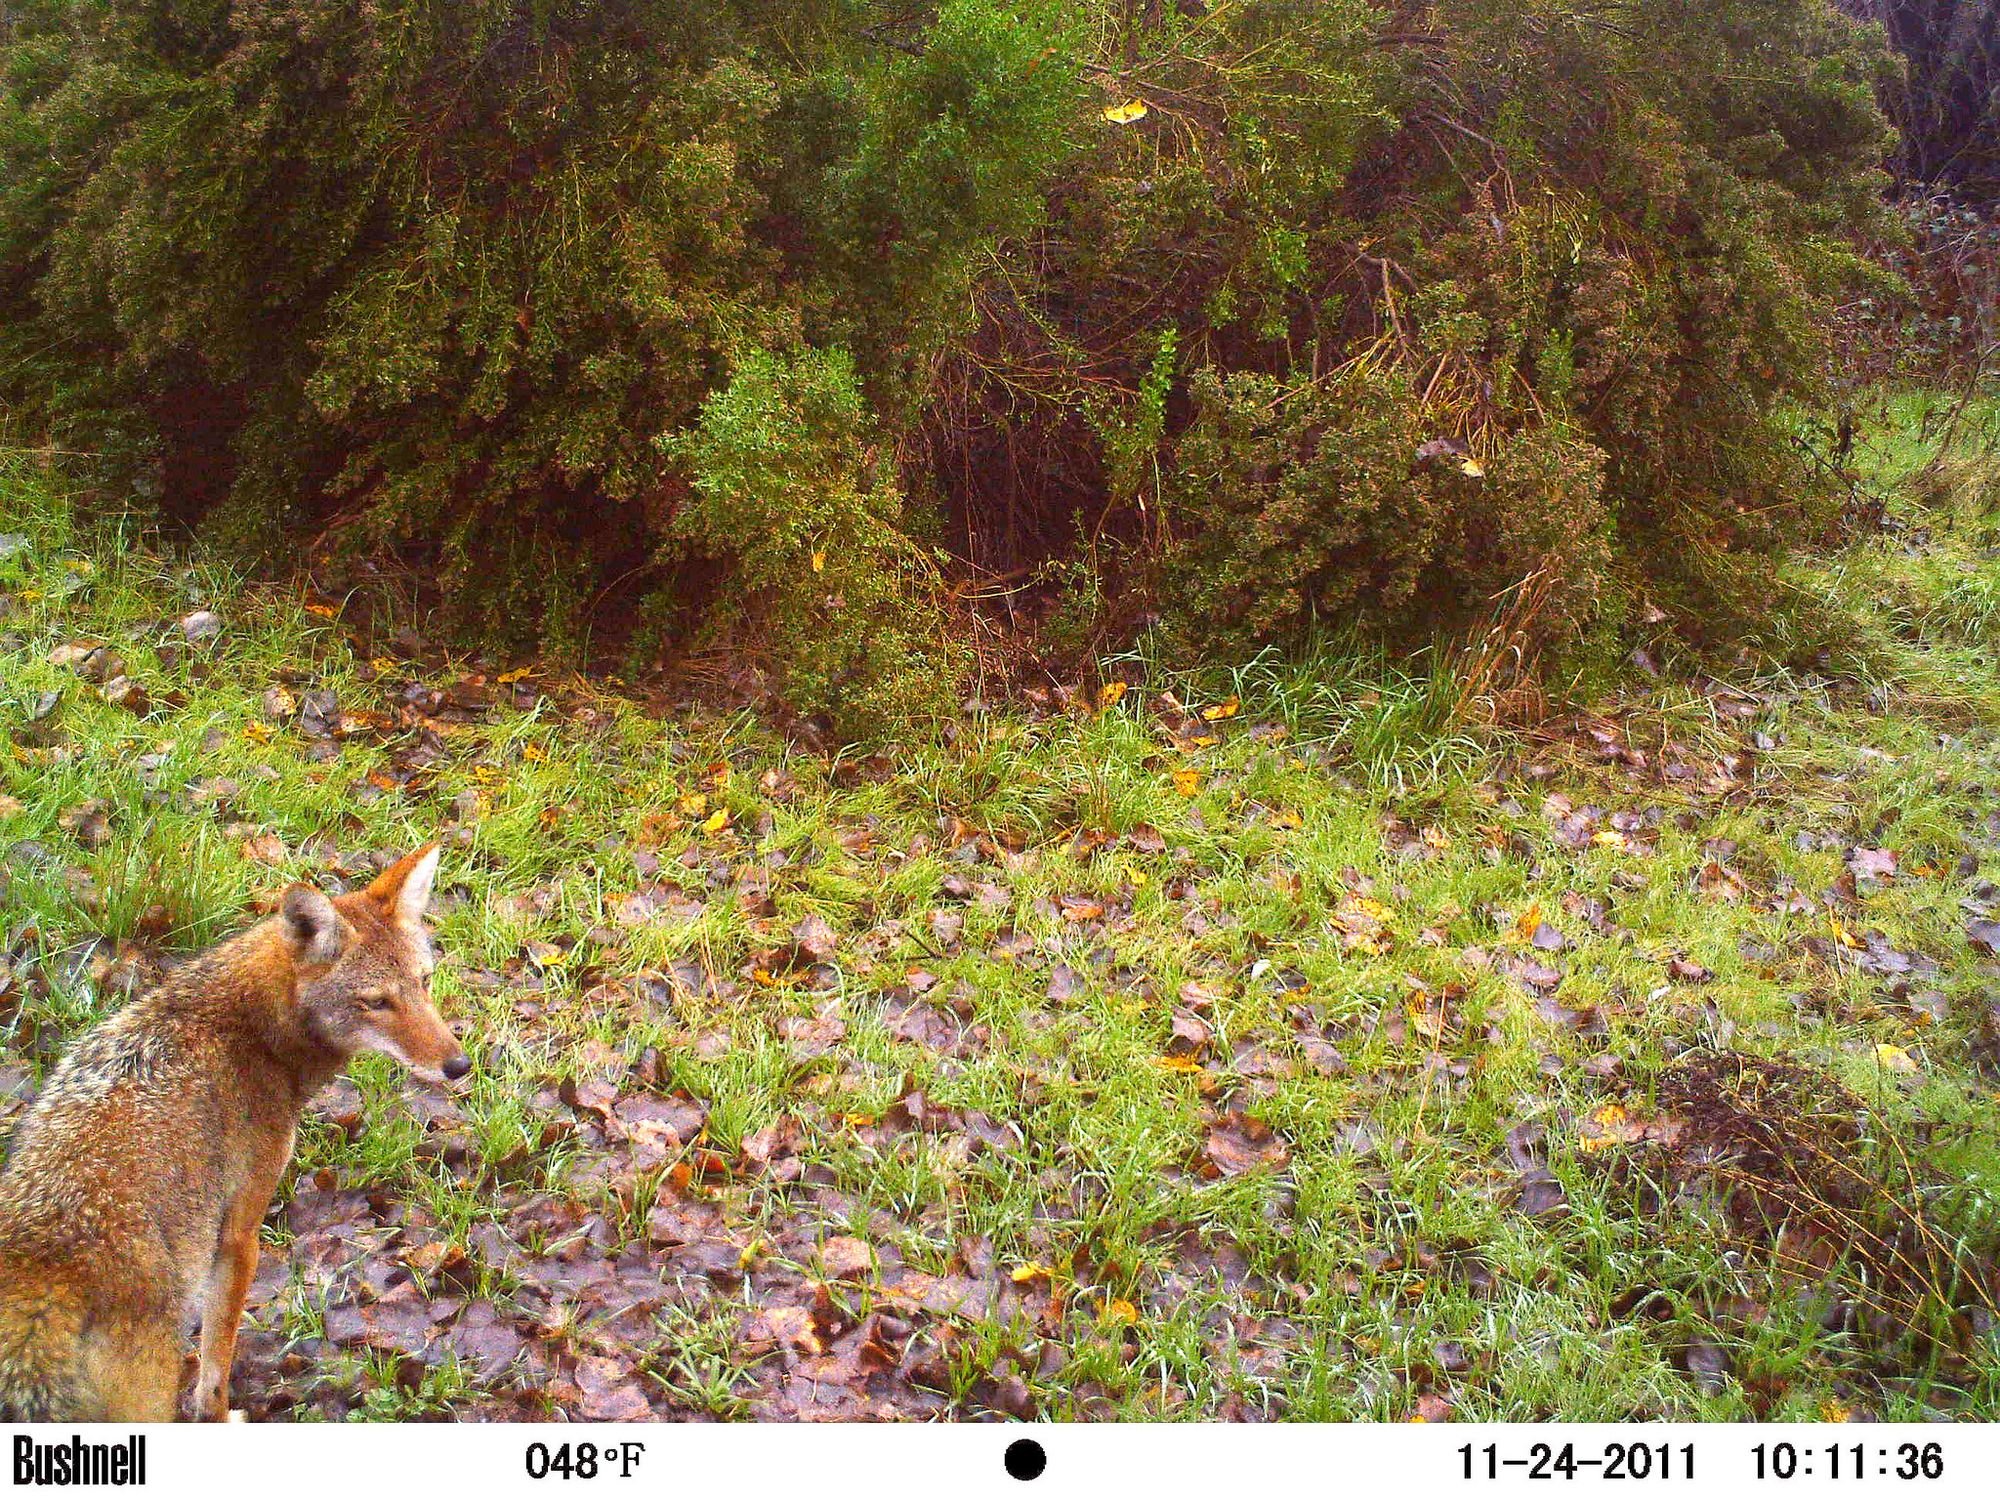 camera trap photo: a red fox at bottom left amidst wet grass and leaves, trees in background